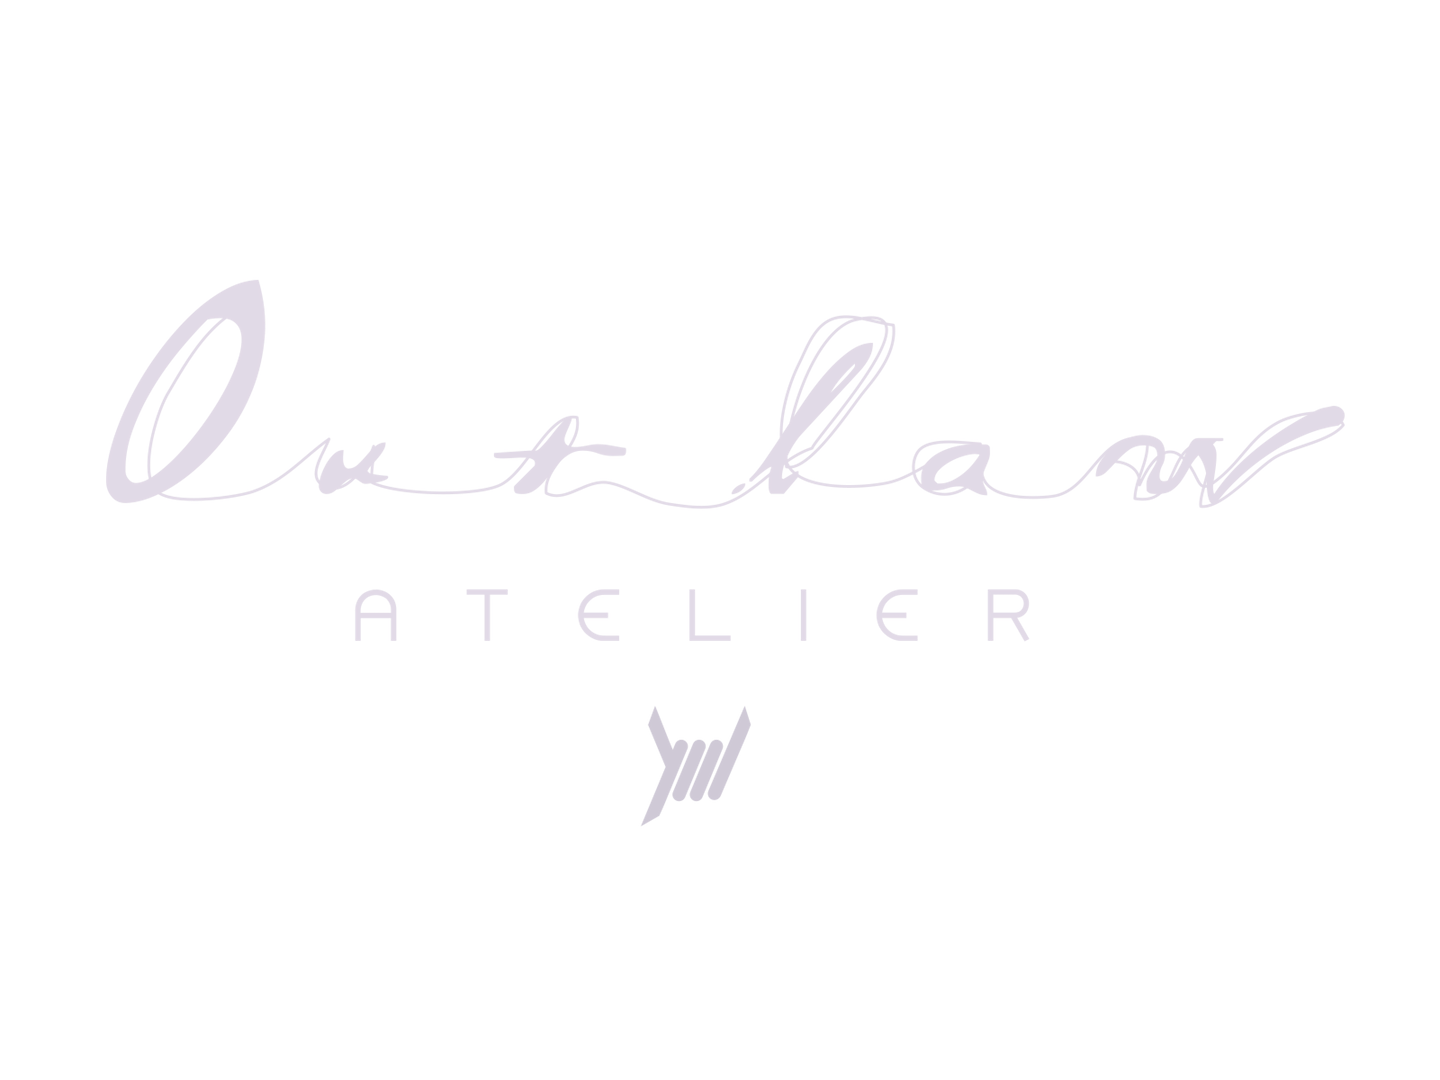 Outlaw Atelier